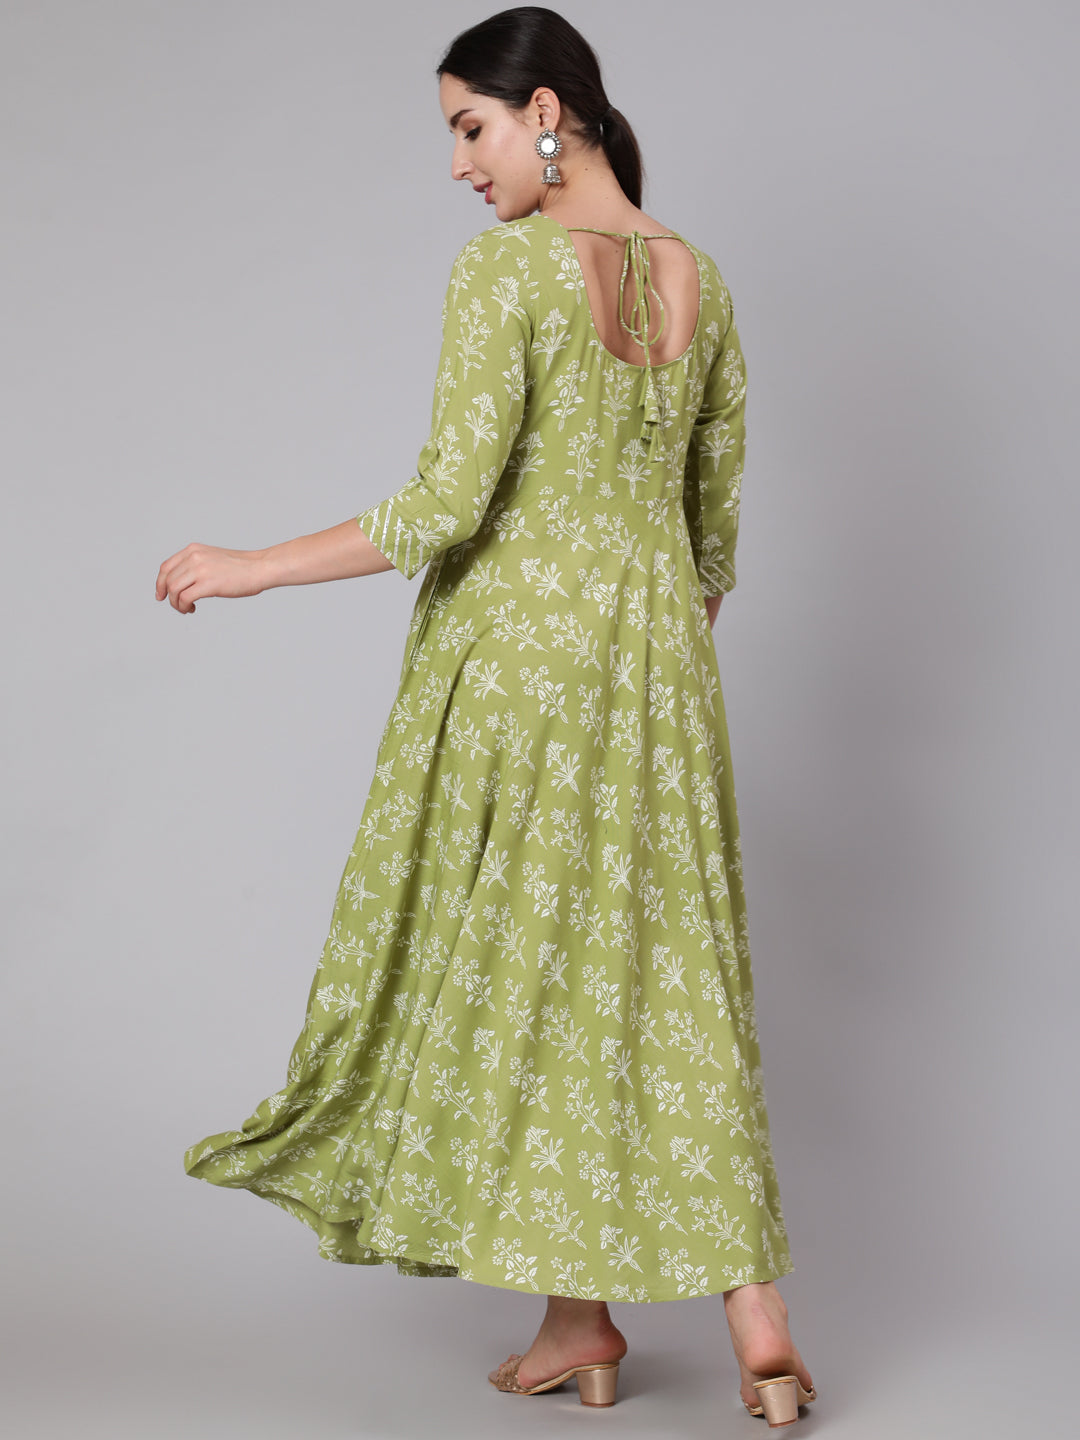 Olive Green Floral Printed Maxi Dress With Three Quarter Sleeves